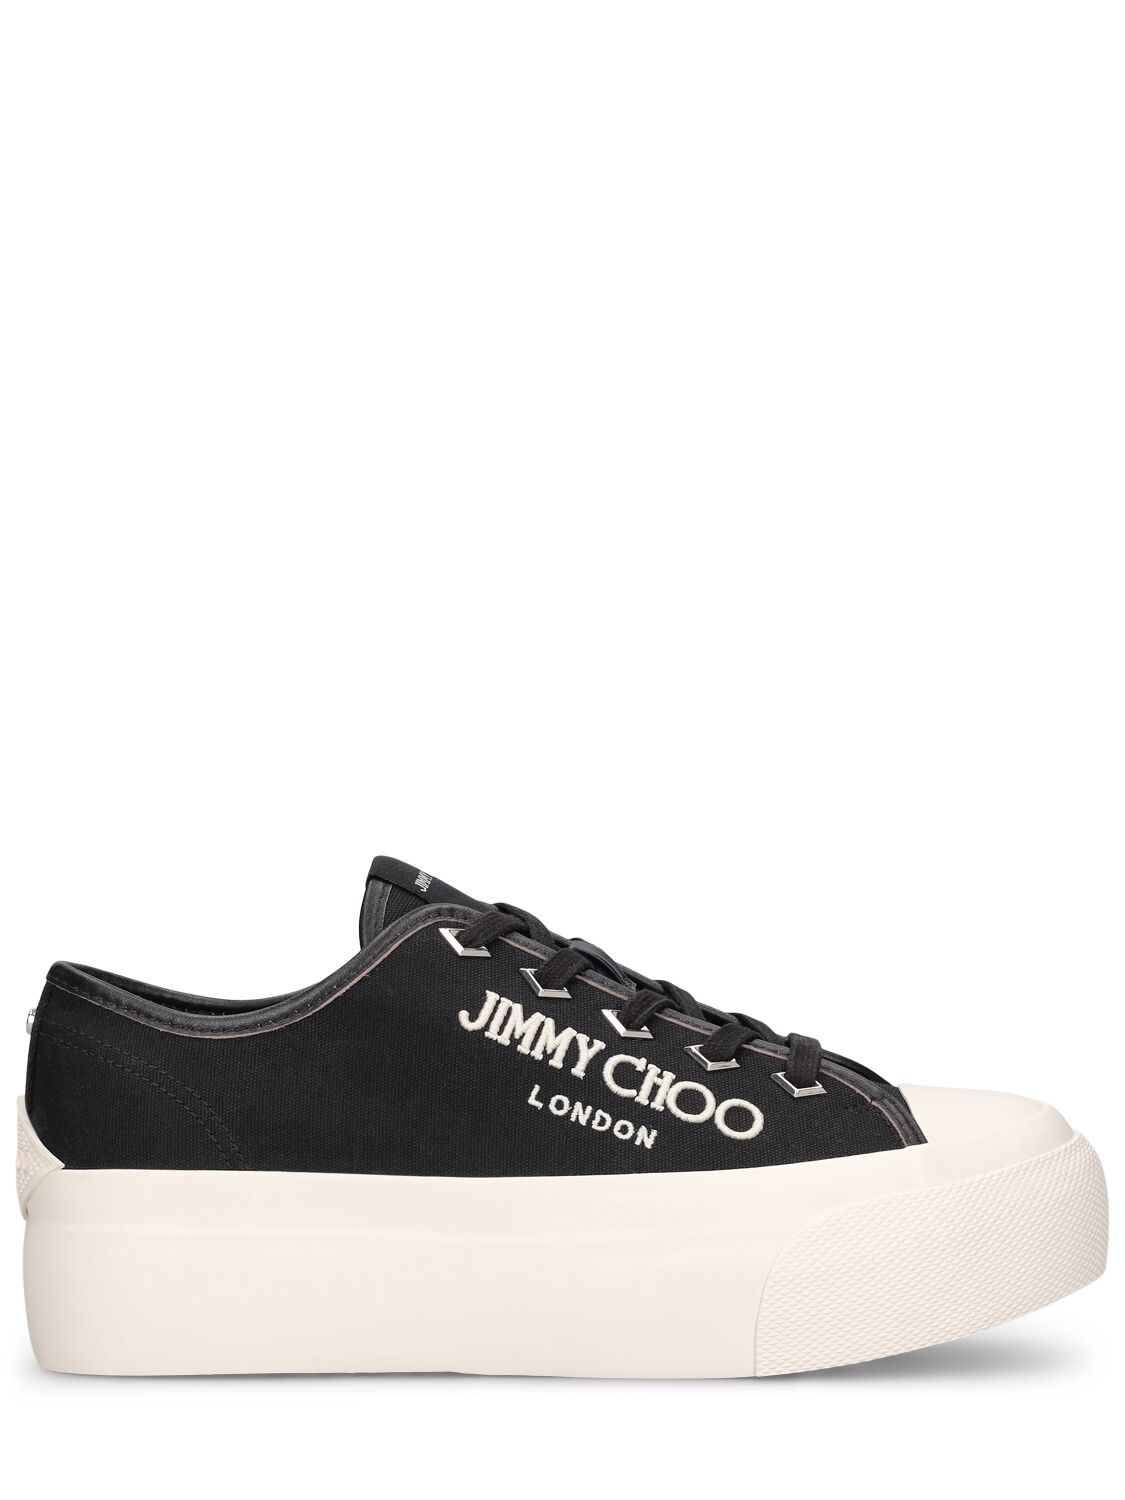 Shop Jimmy Choo Palma Maxi Canvas & Leather Sneakers In Black,white